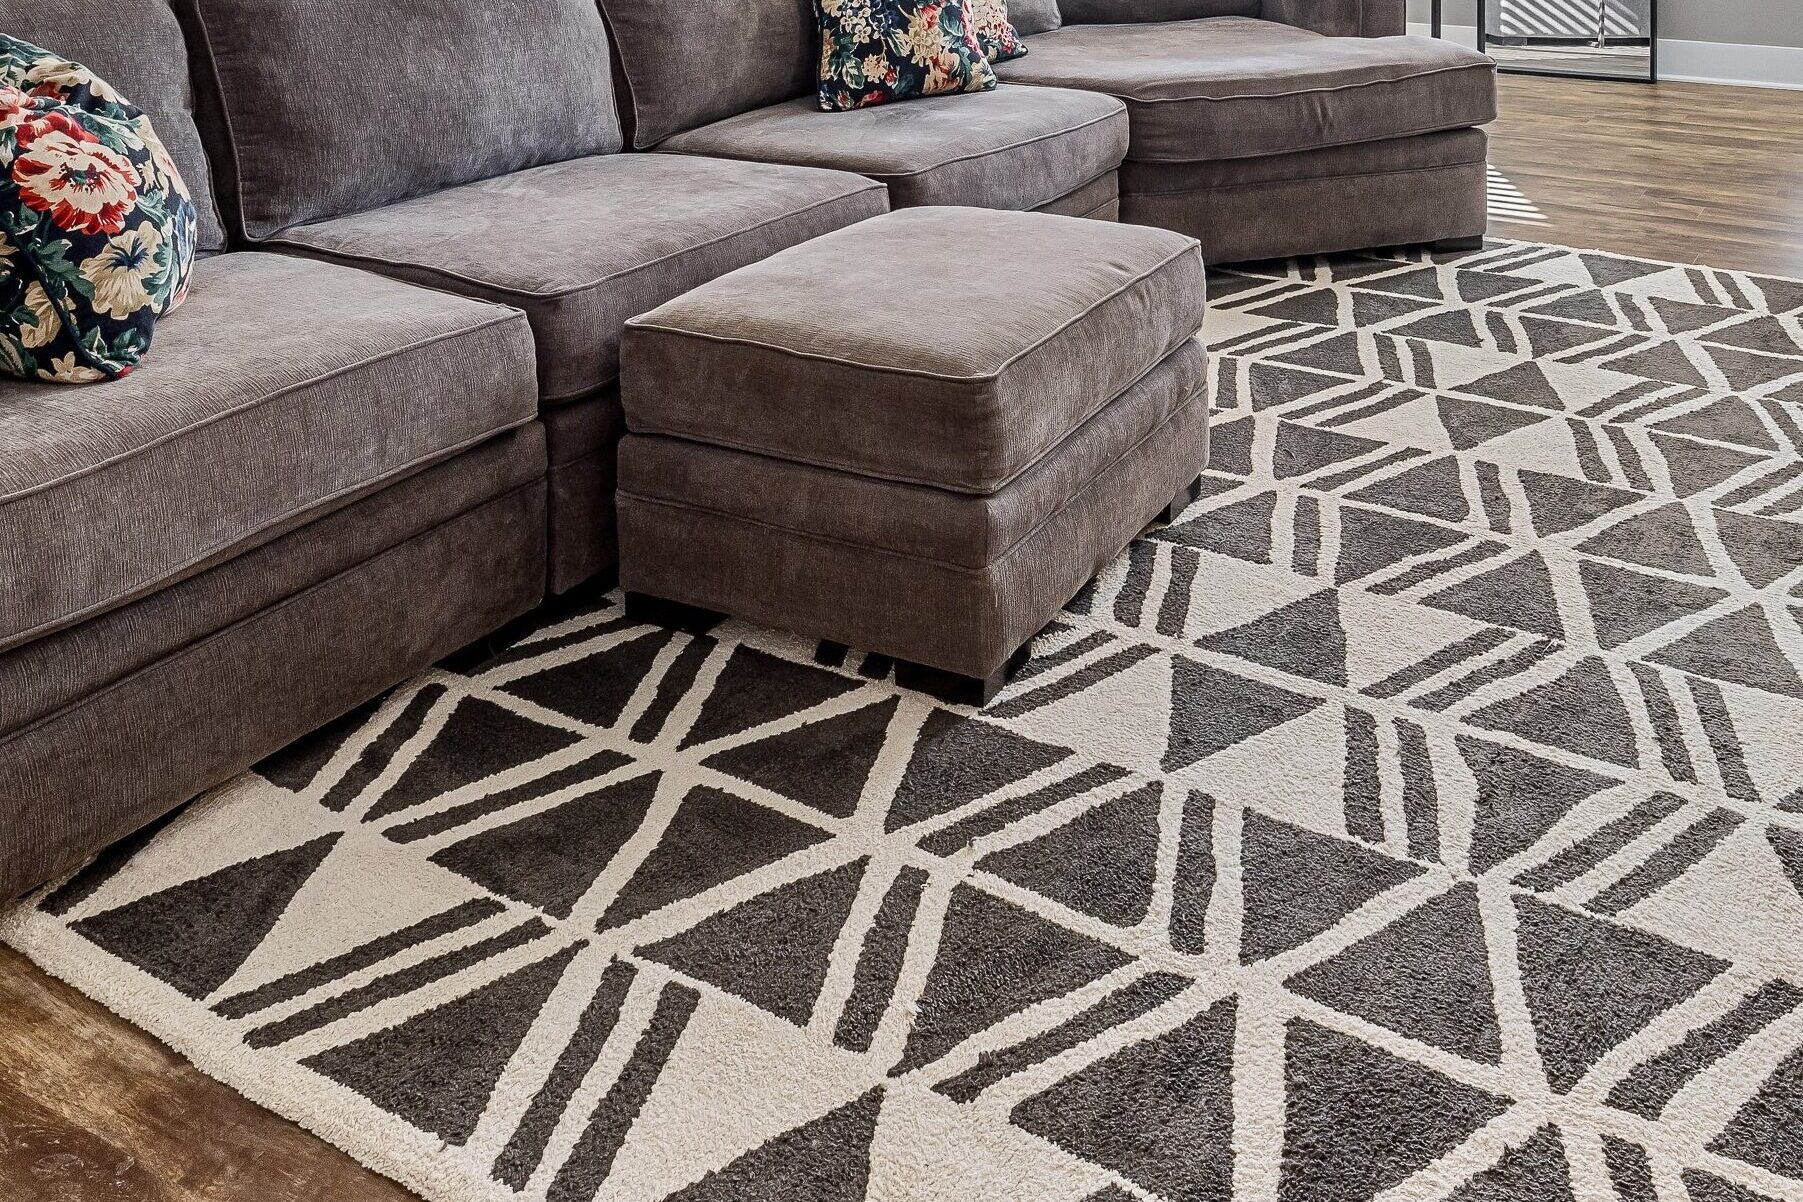 This eclectic room gets drama from a top ten rug trend, the large-scale geometric rug.